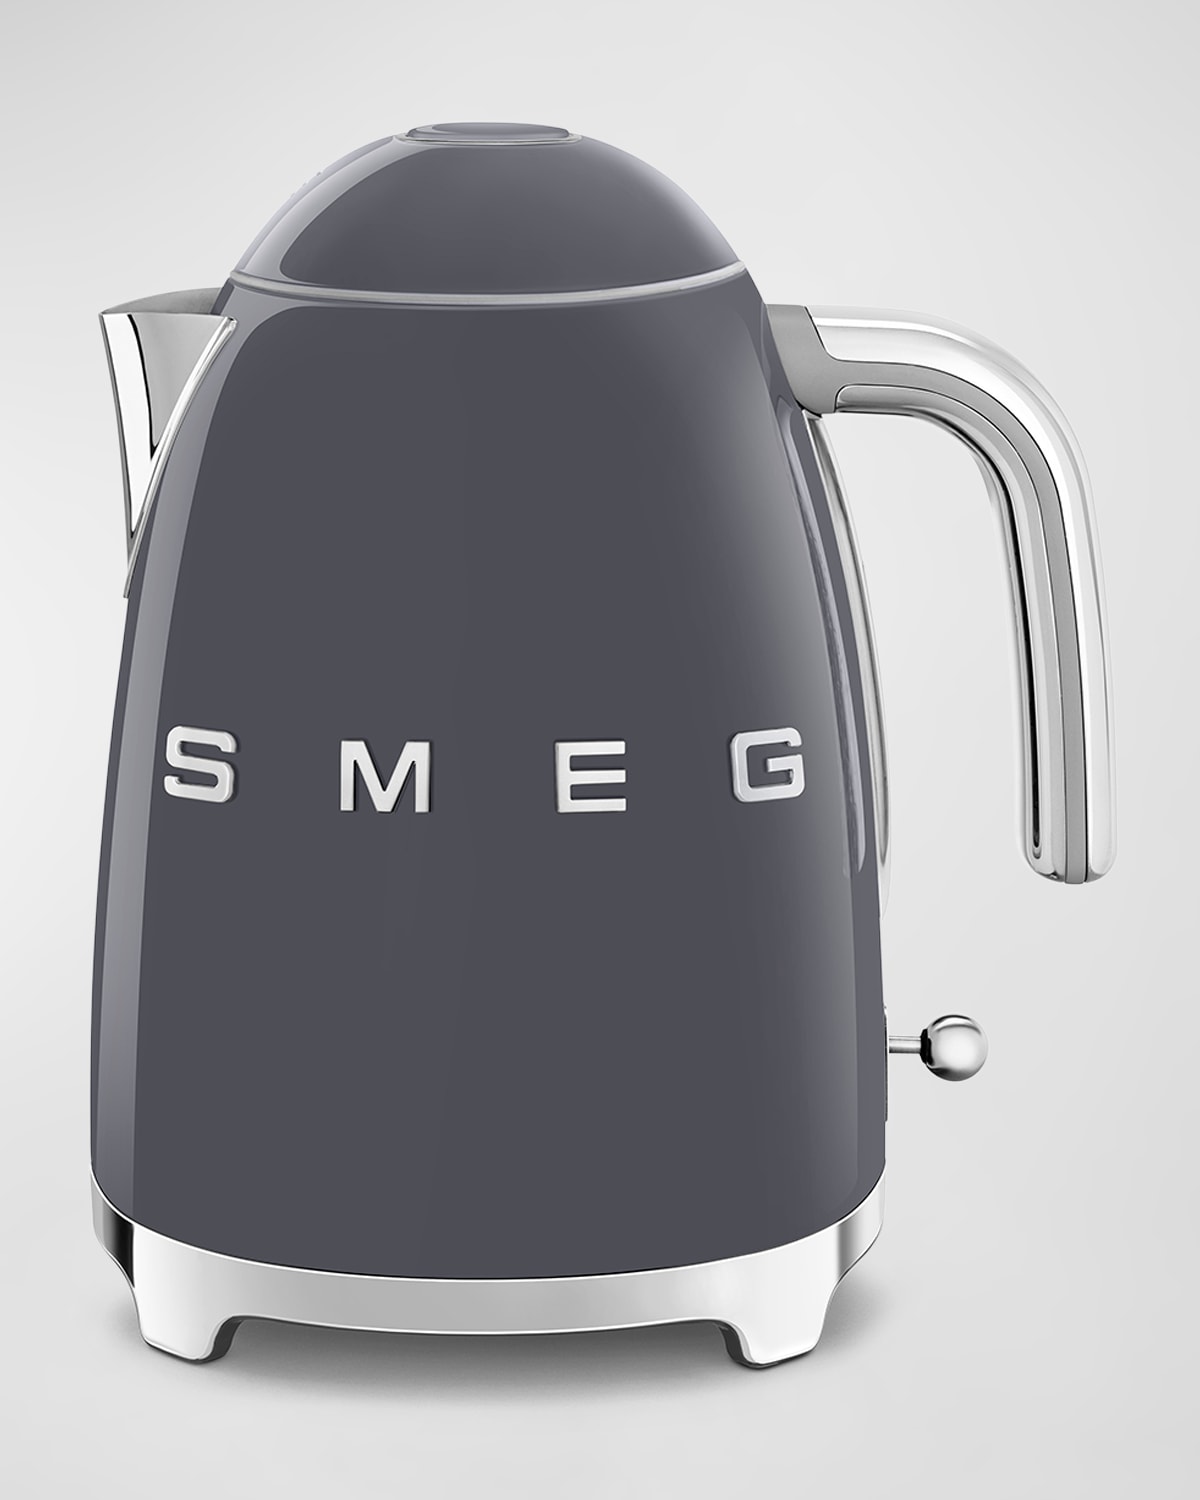 Smeg Electric Stainless Steel Kettle In Gray